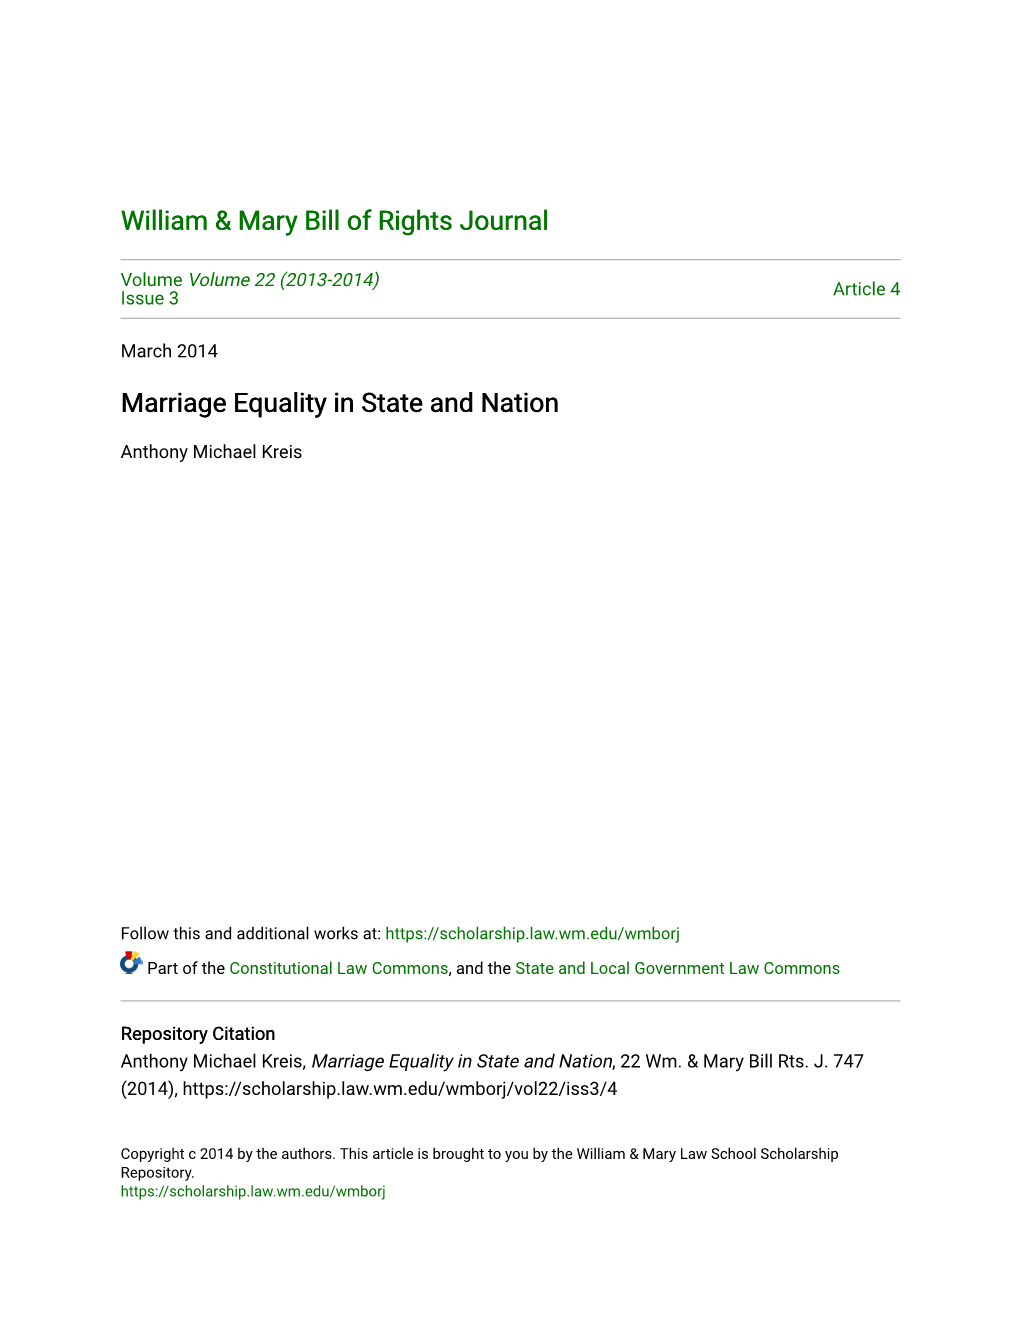 Marriage Equality in State and Nation